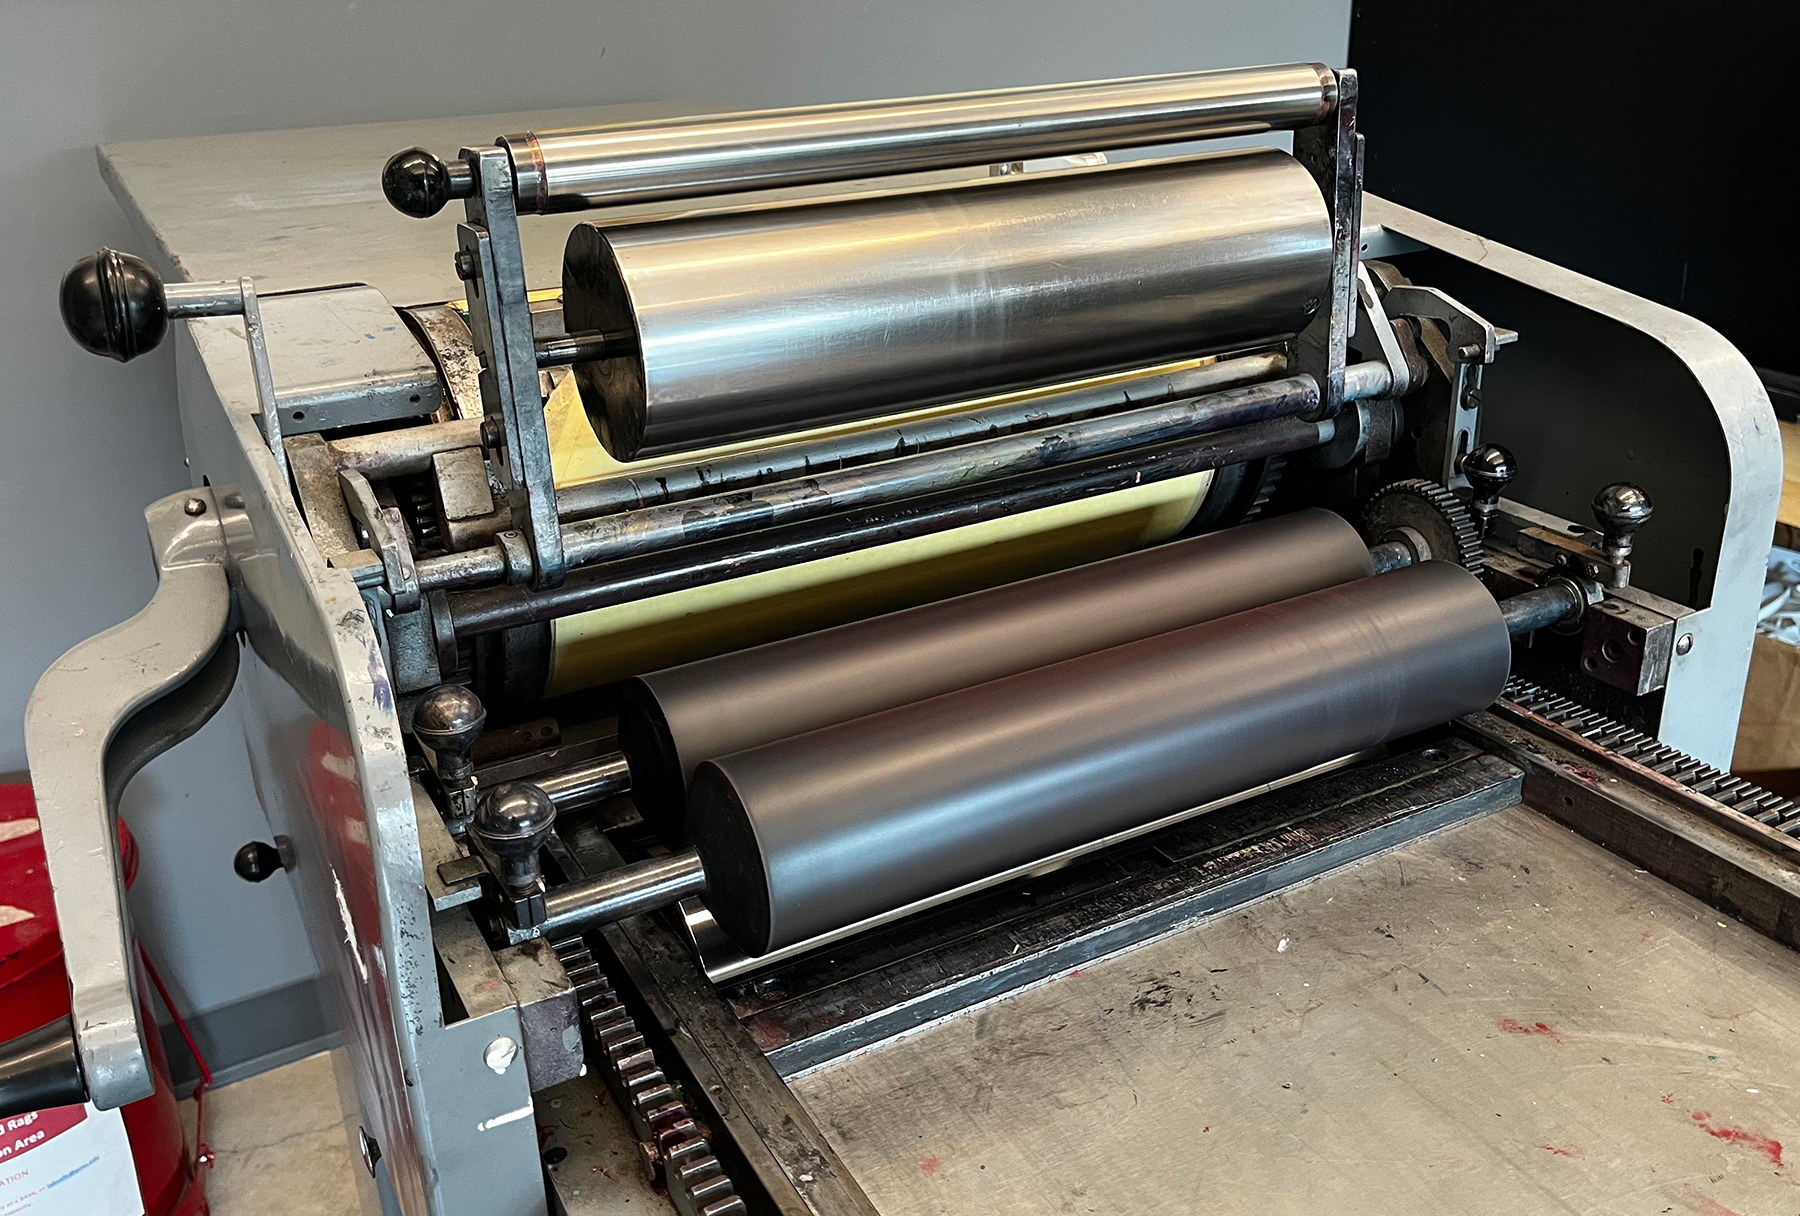 The Letterpress Studio is fully equipped with two Vandercook presses and a hand-cranked platen press.